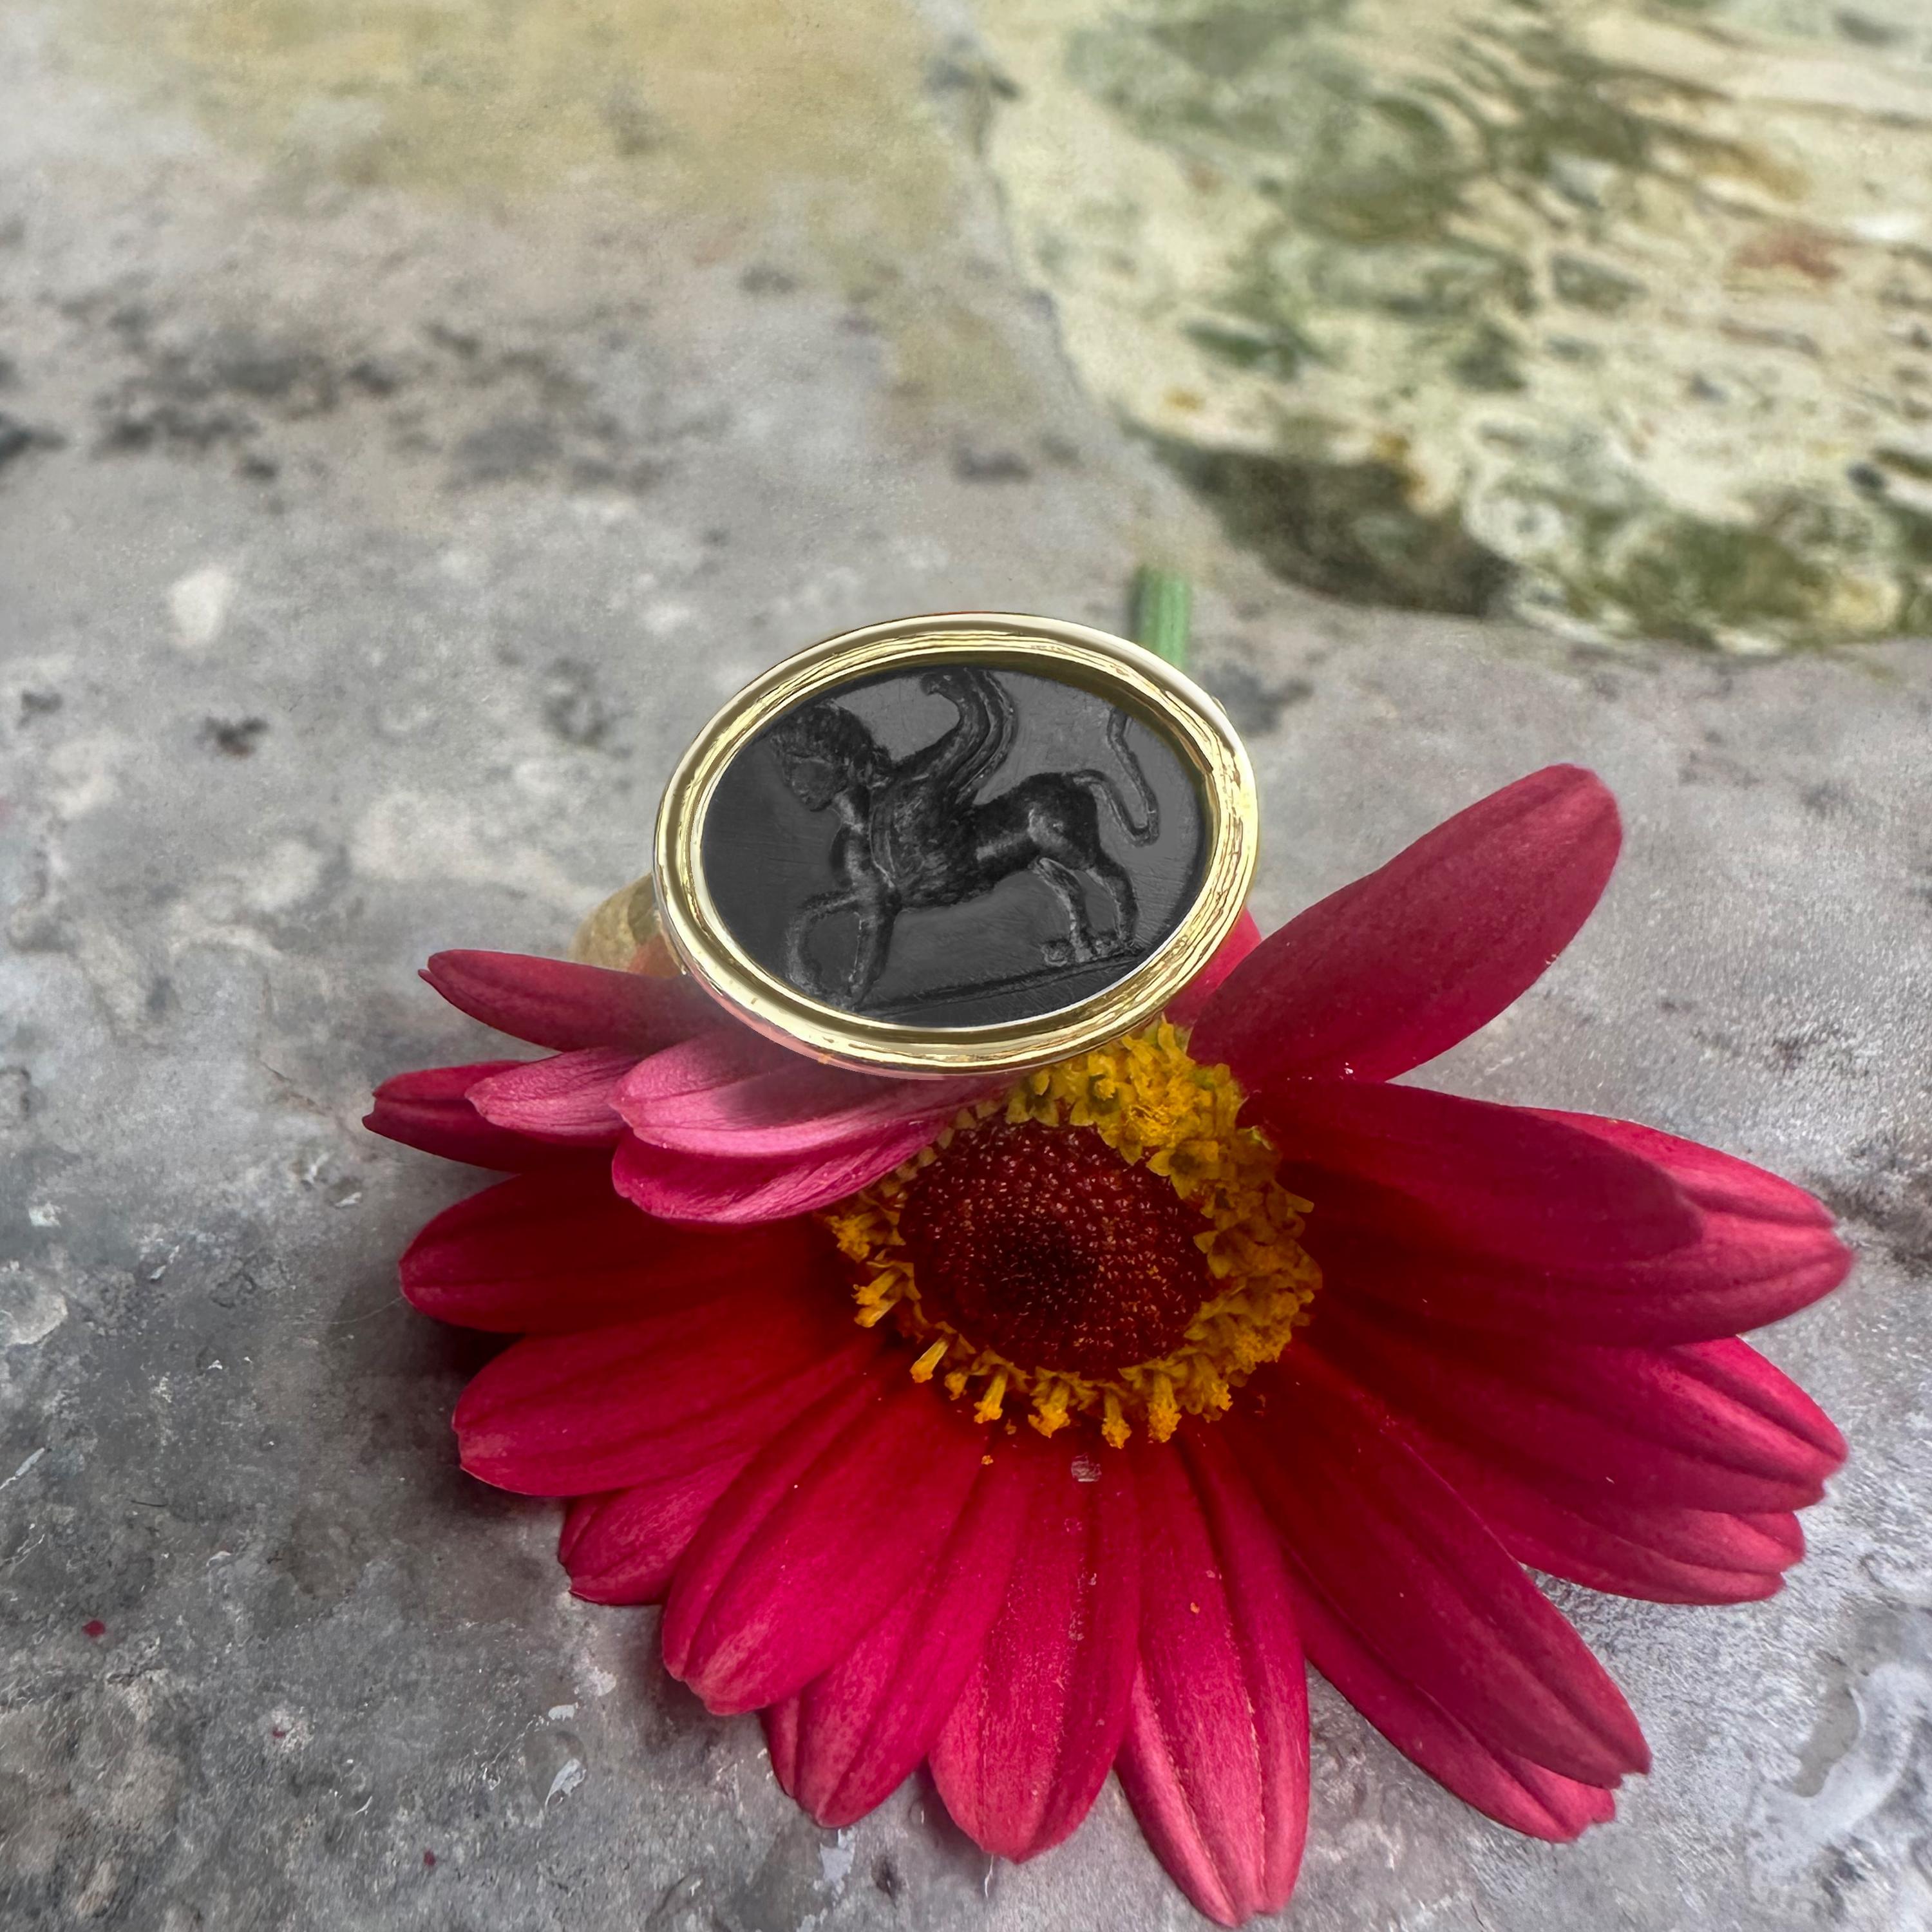 Crafted by our skilled goldsmiths, this 18 Kt gold ring features an authentic Roman onyx from the 1st-2nd century AD, adorned with a captivating depiction of a Sphinx. Positioned amidst realms of both humanity and fantastical creatures, the